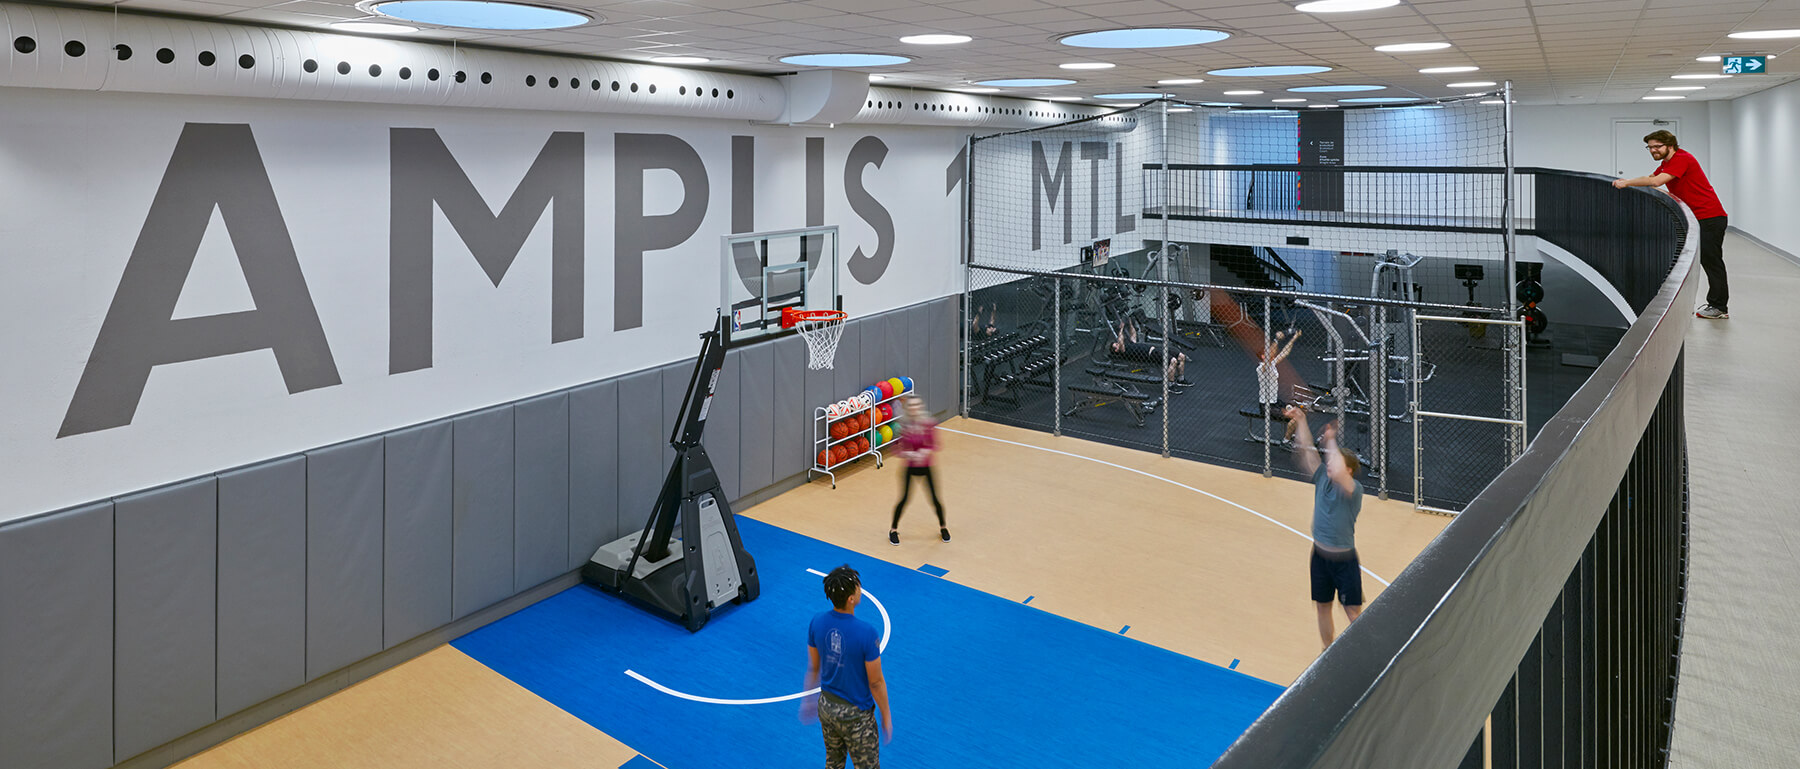 Fitness Centre & Indoor Basketball Court​